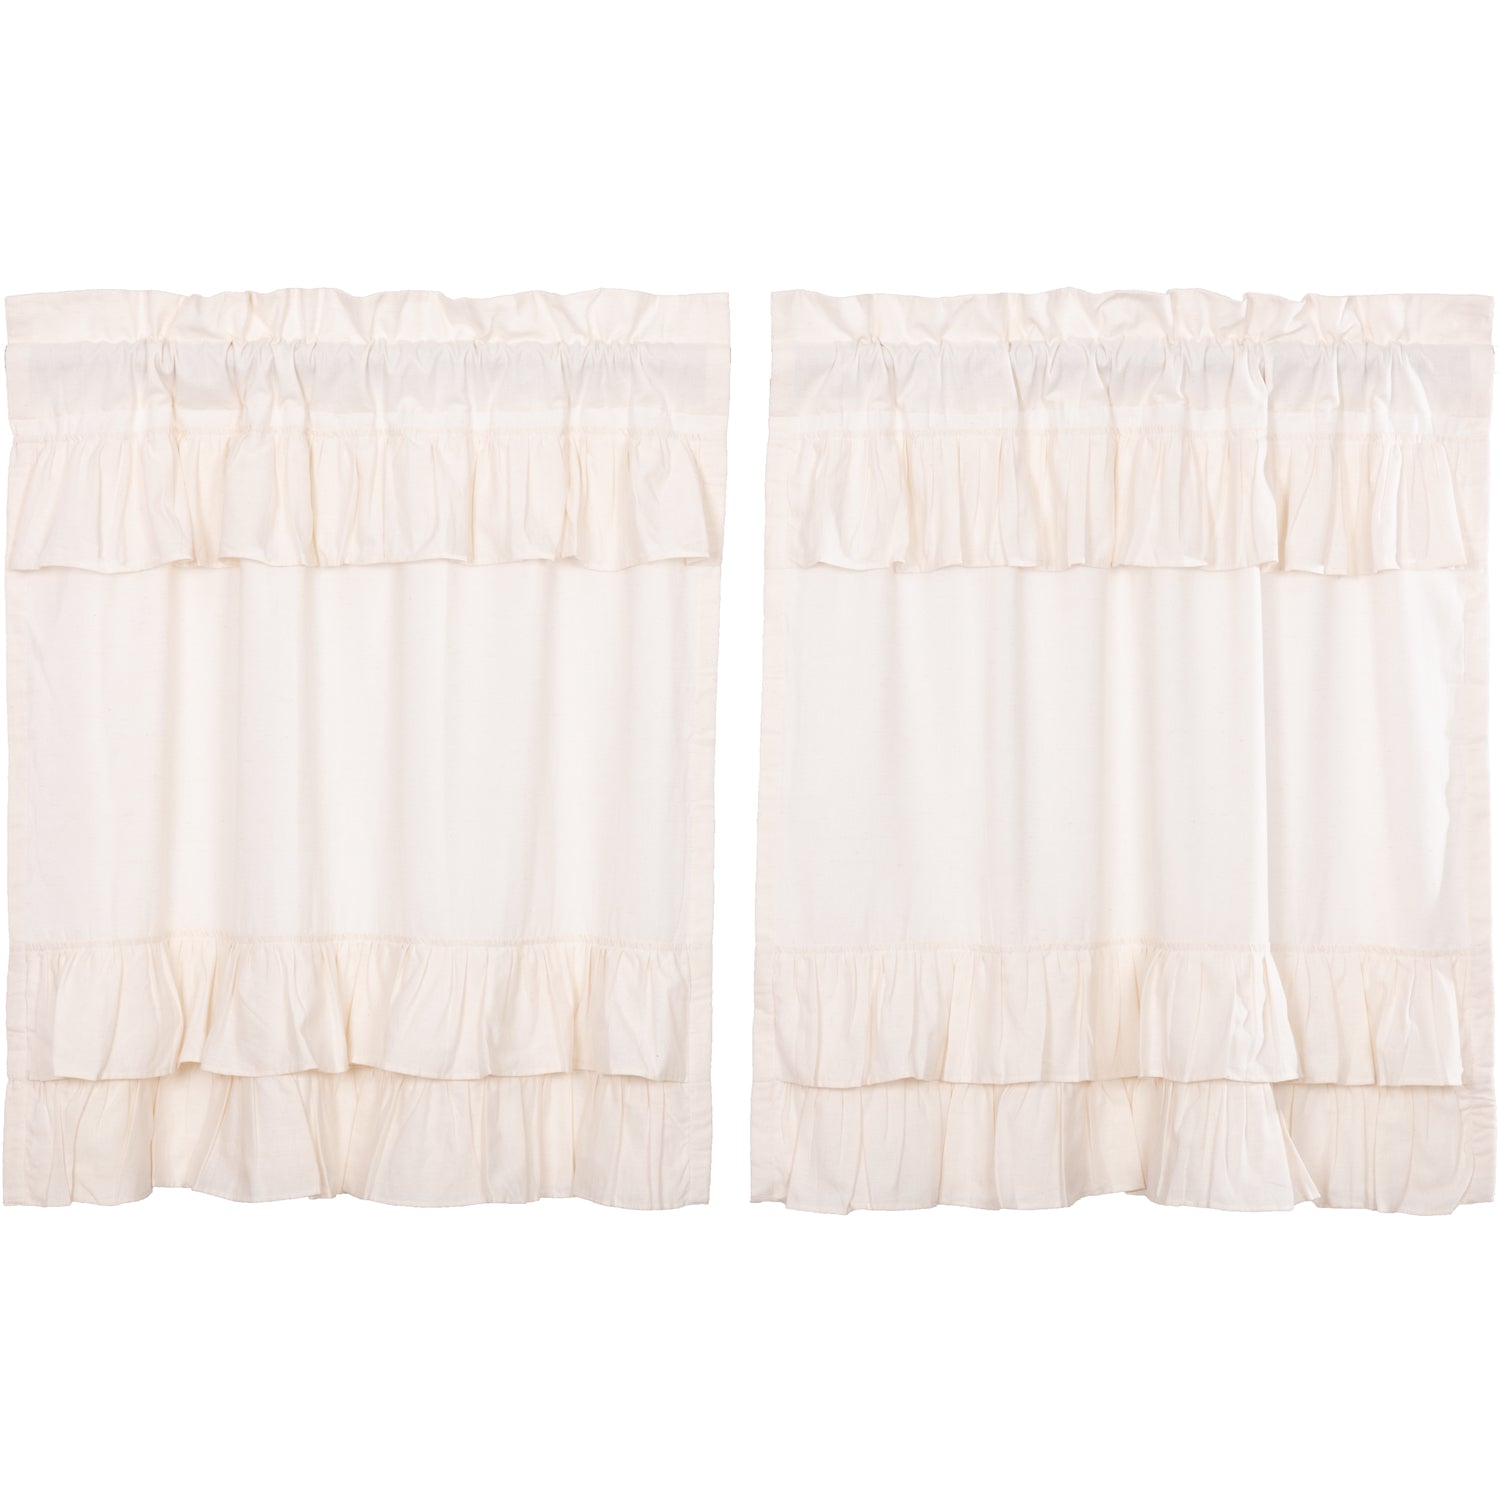 April & Olive Simple Life Flax Antique White Ruffled Tier Set of 2 L36xW36 By VHC Brands